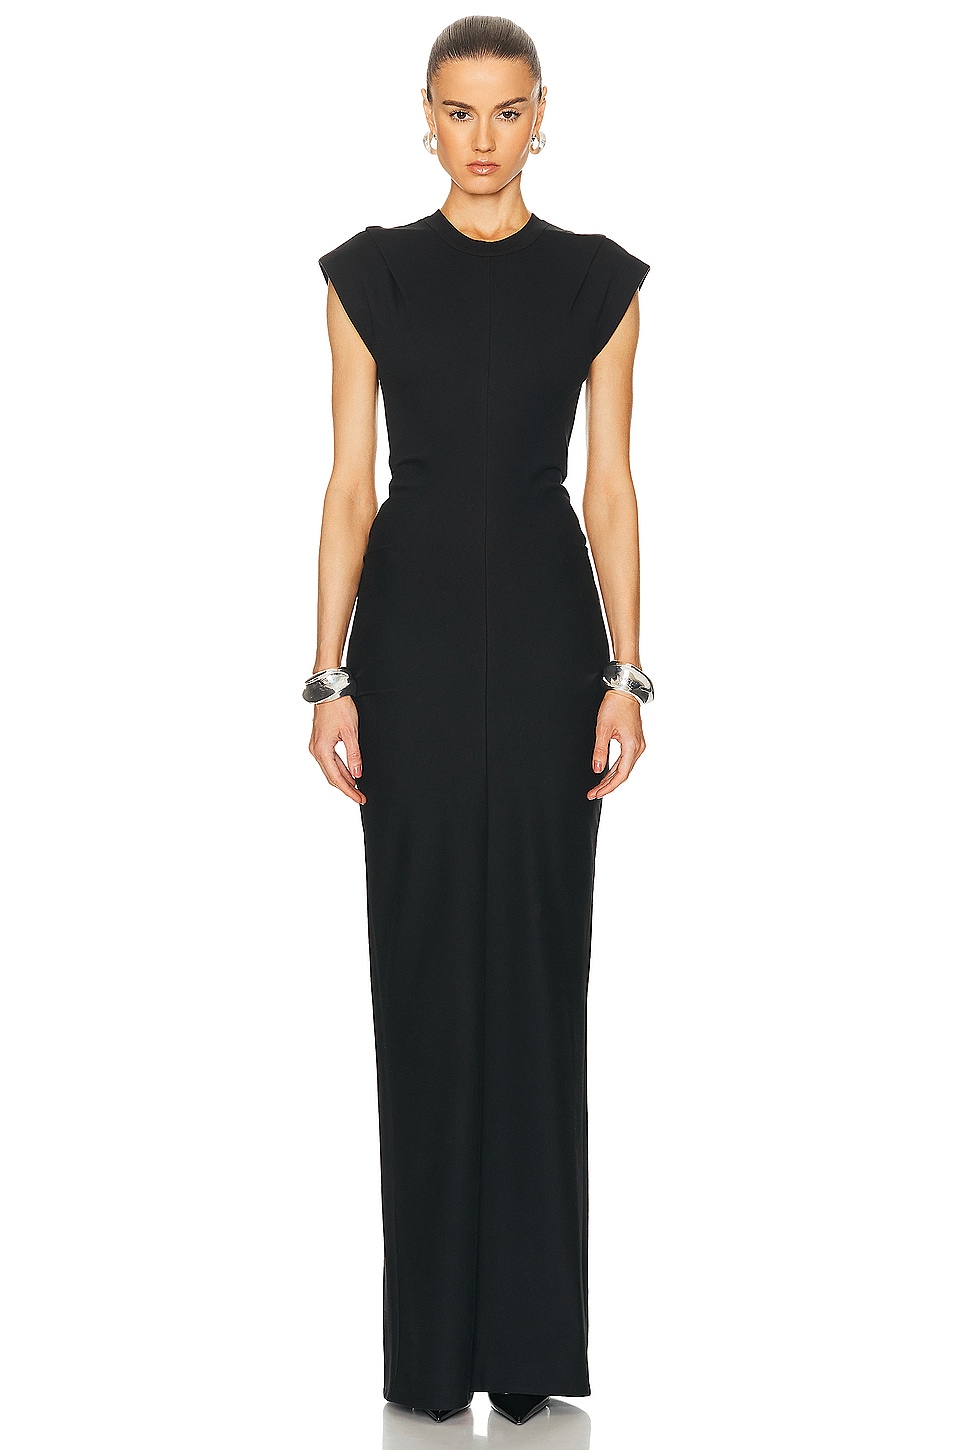 Image 1 of Alexander Wang Drop Shoulder Crew Neck Maxi Dress With Side Drape in Black